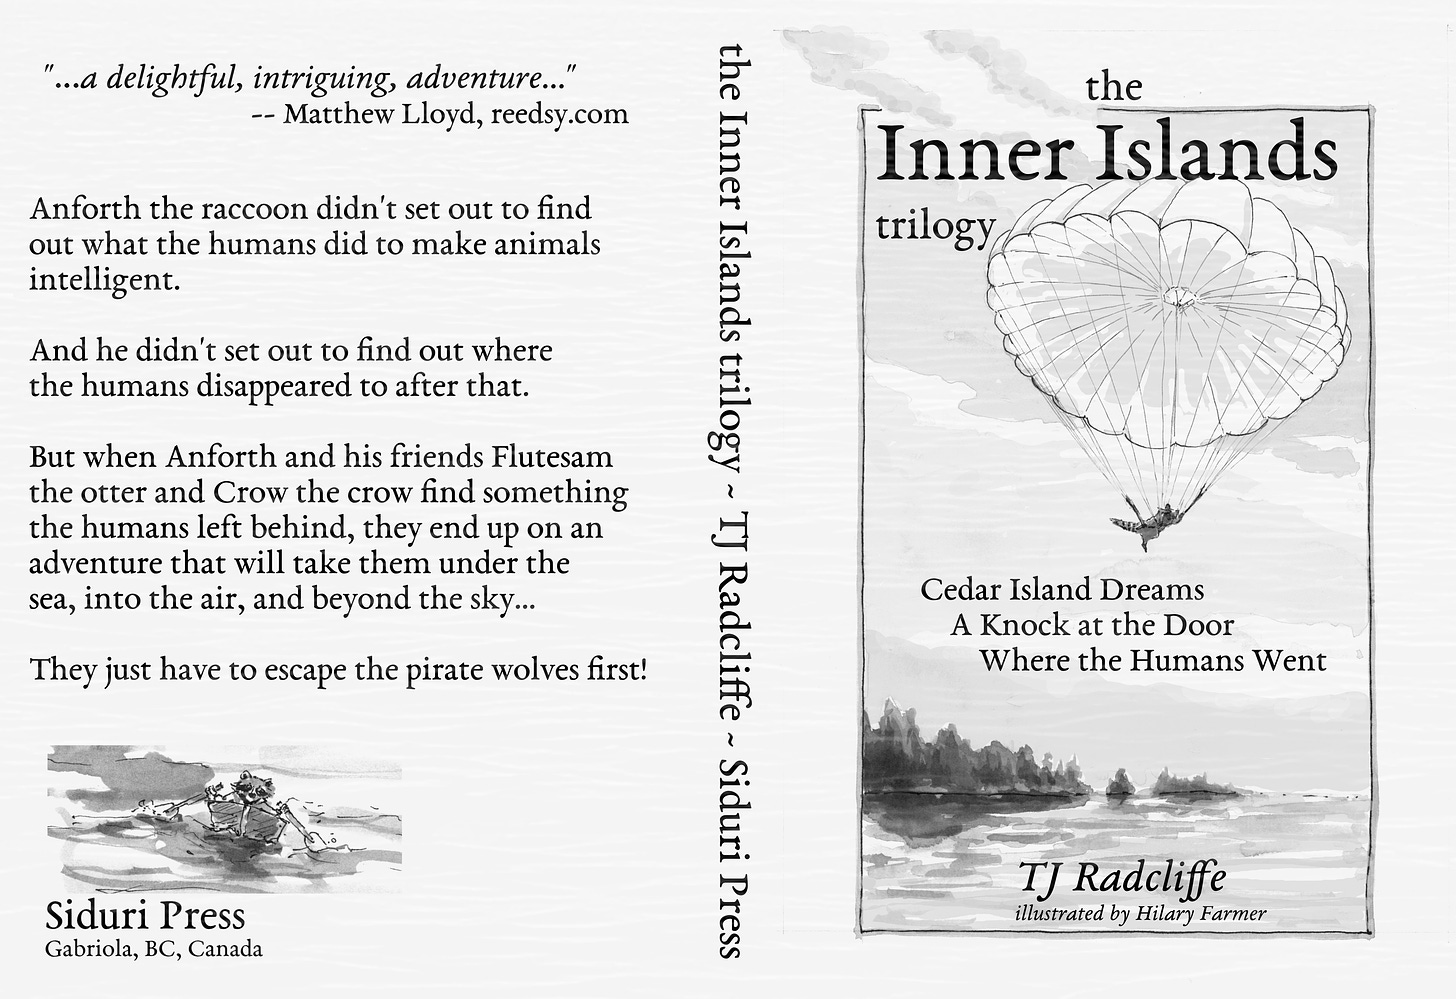 Cover of the Inner Islands Trilogy by TJ Radcliffe showing Anforth the raccoon parachuting to Earth over water